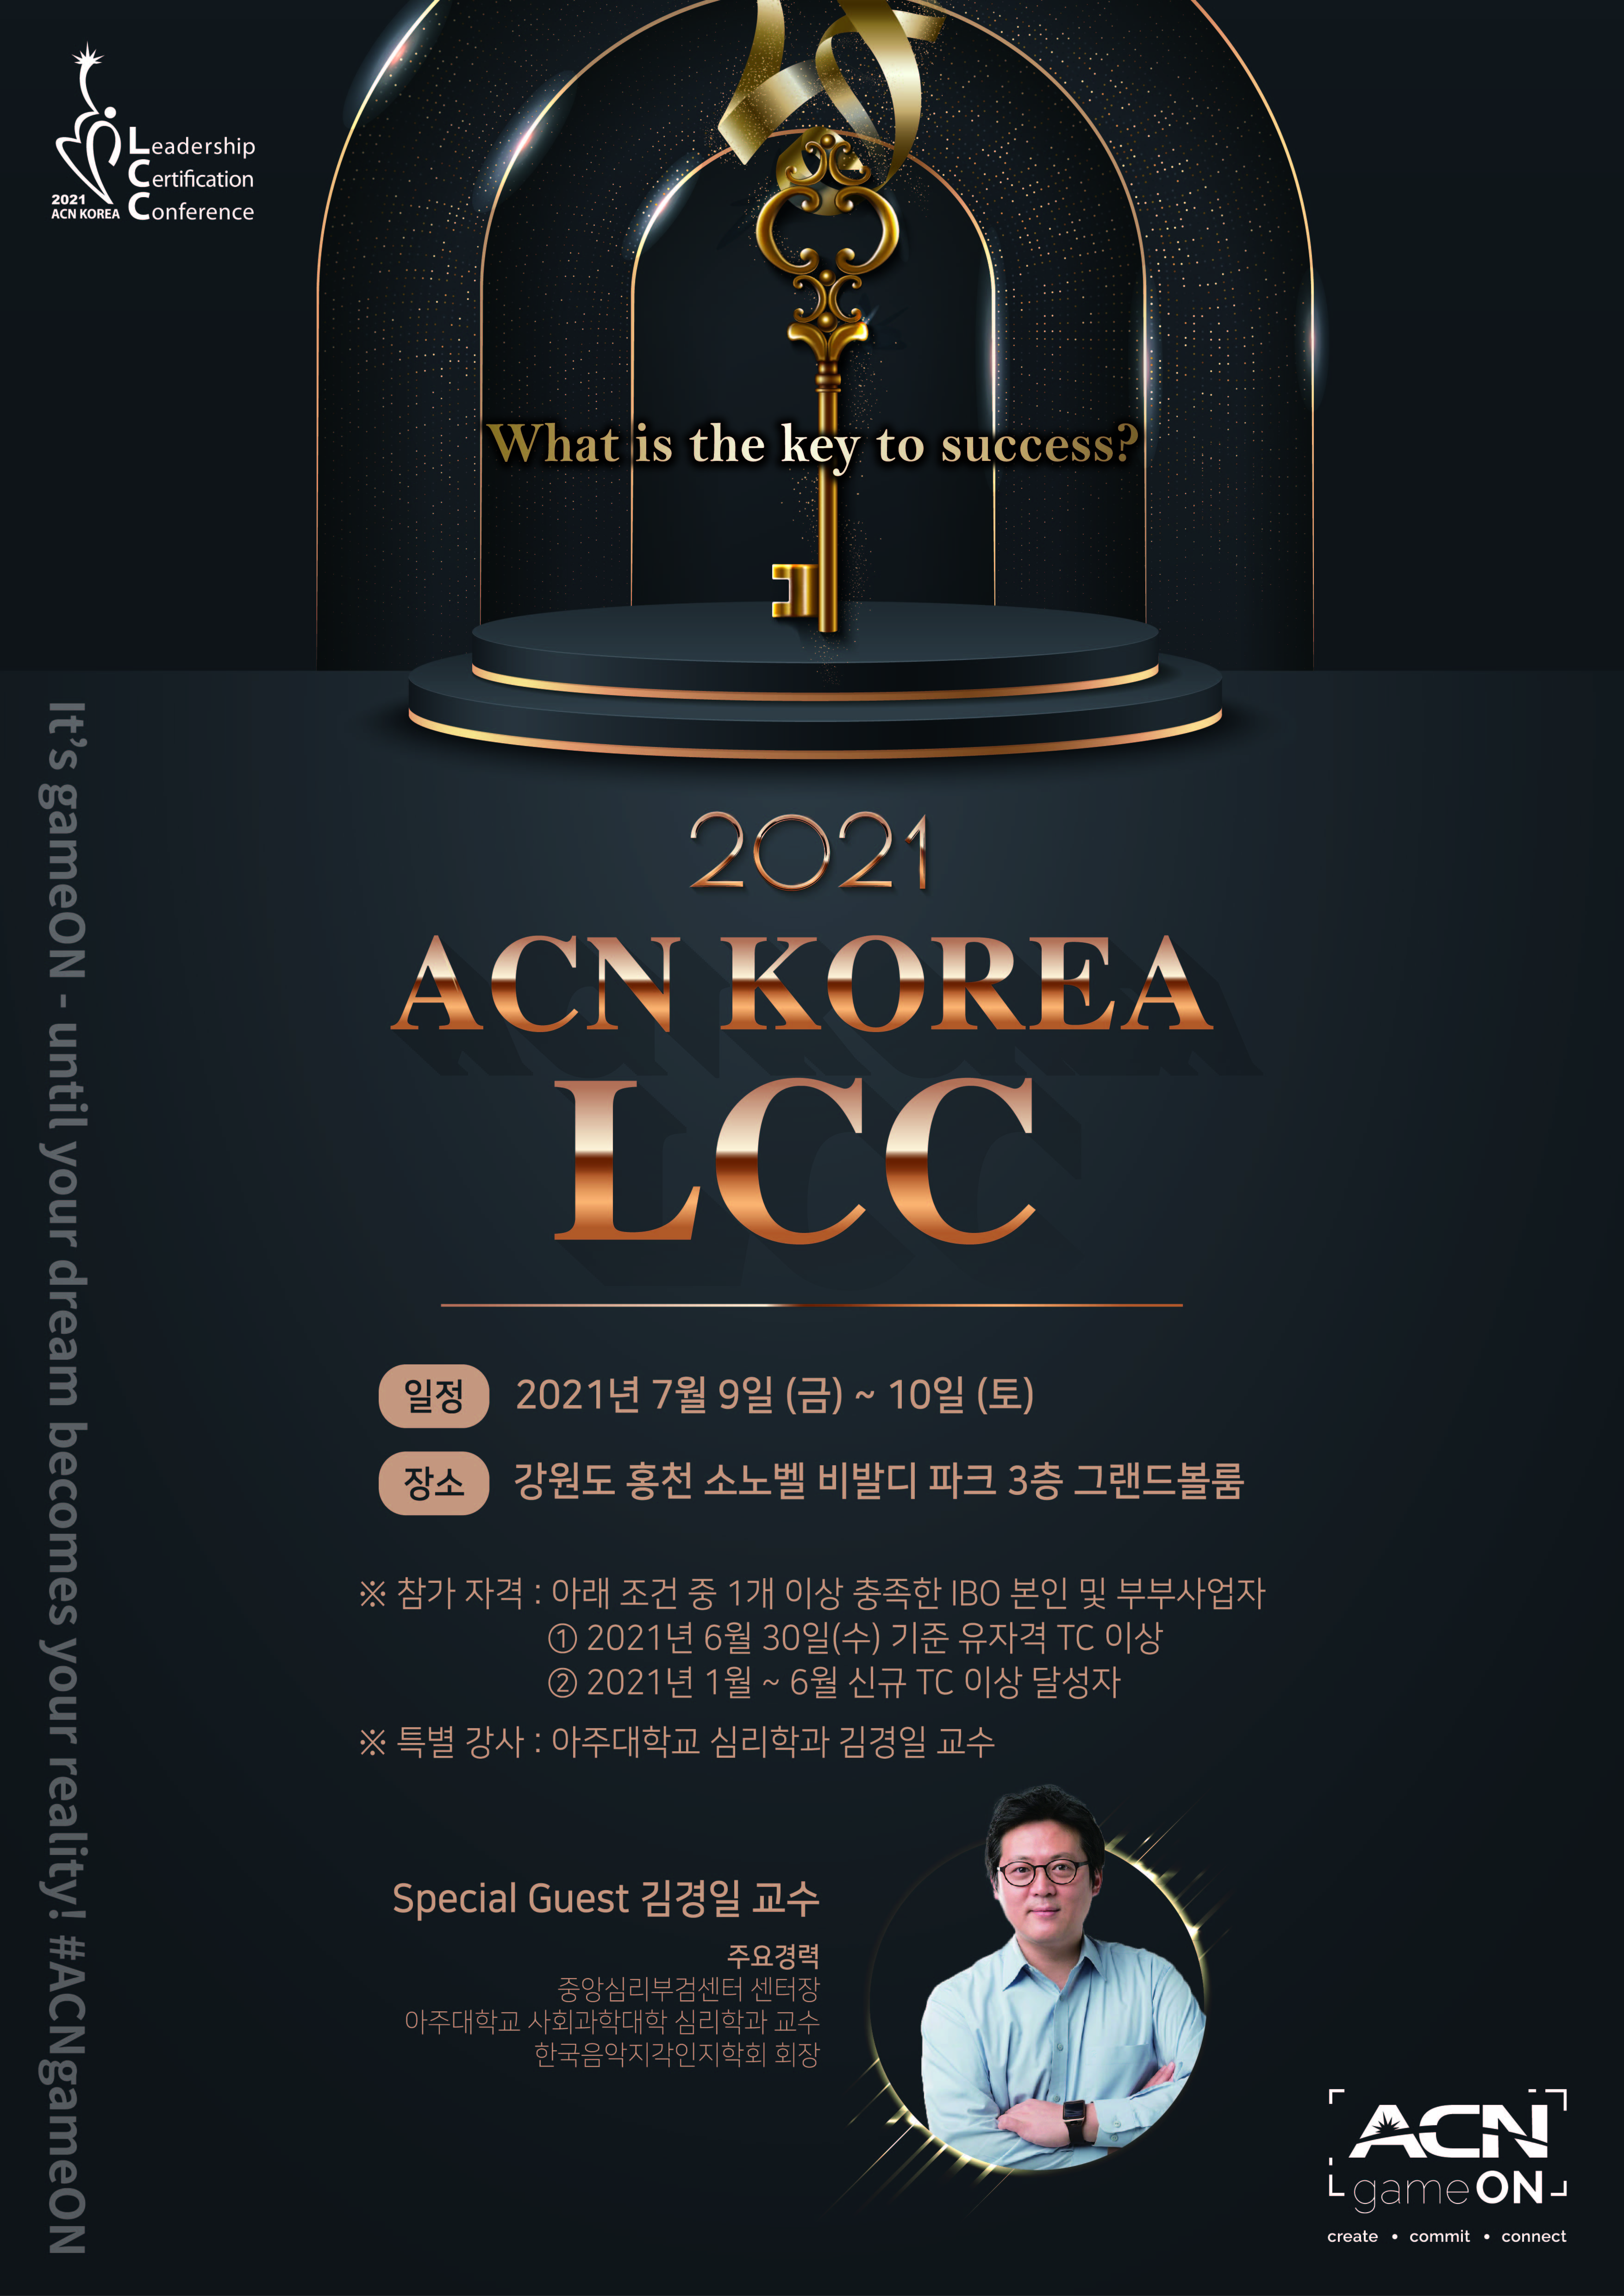 2021 ACN KOREA LCC - what is the key to success?